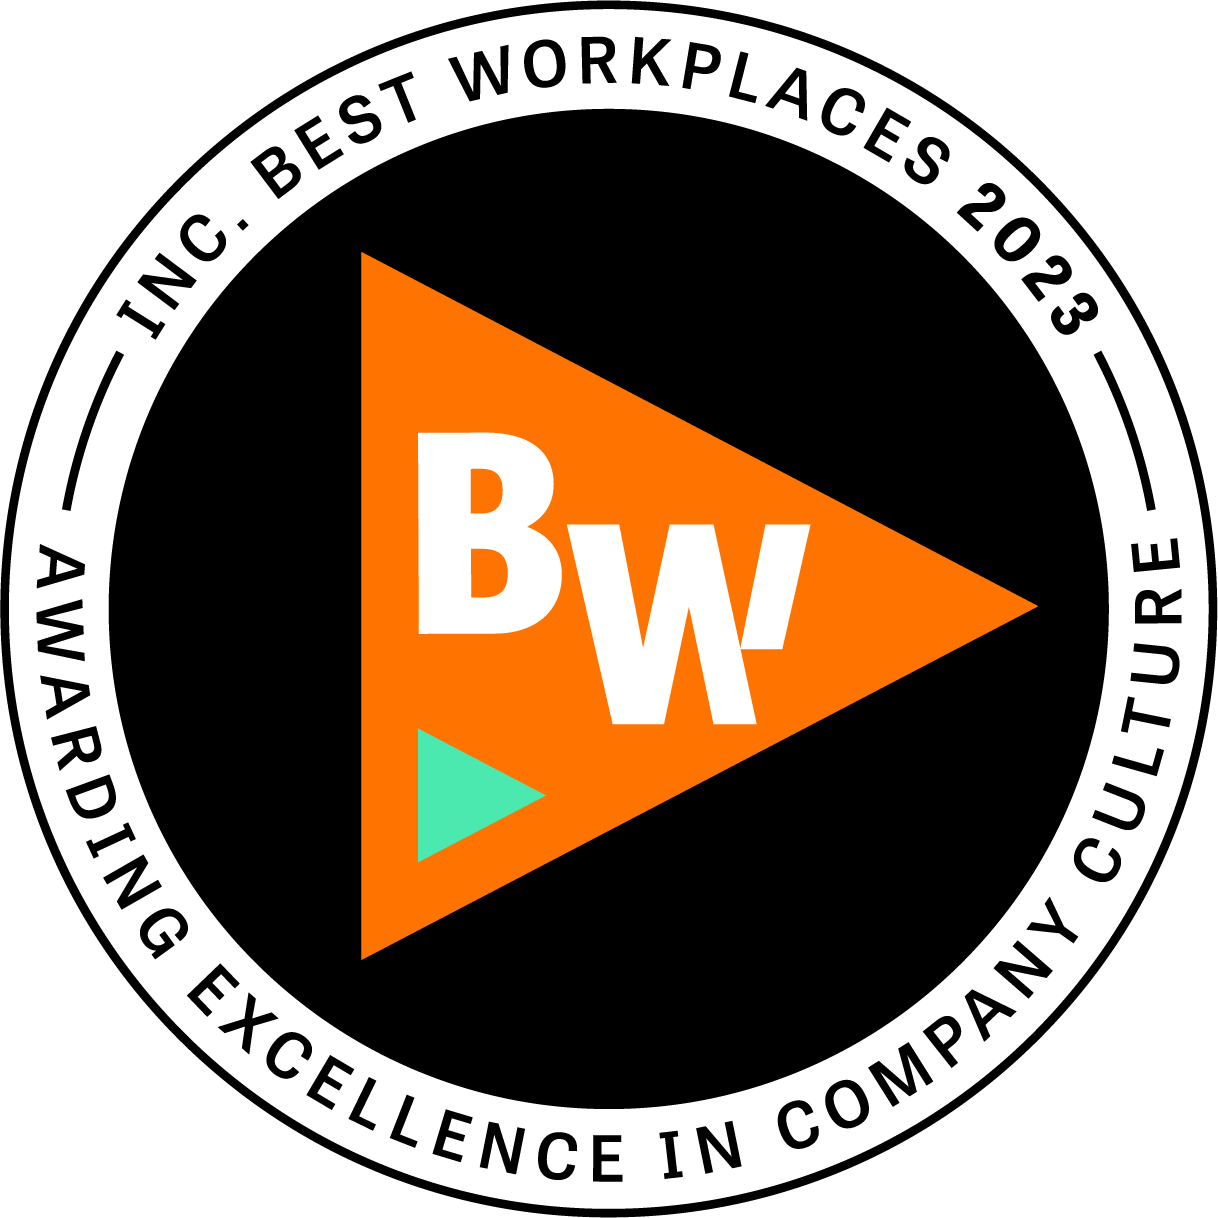 Best Workplaces 2023 - Awarding excellence in company culture